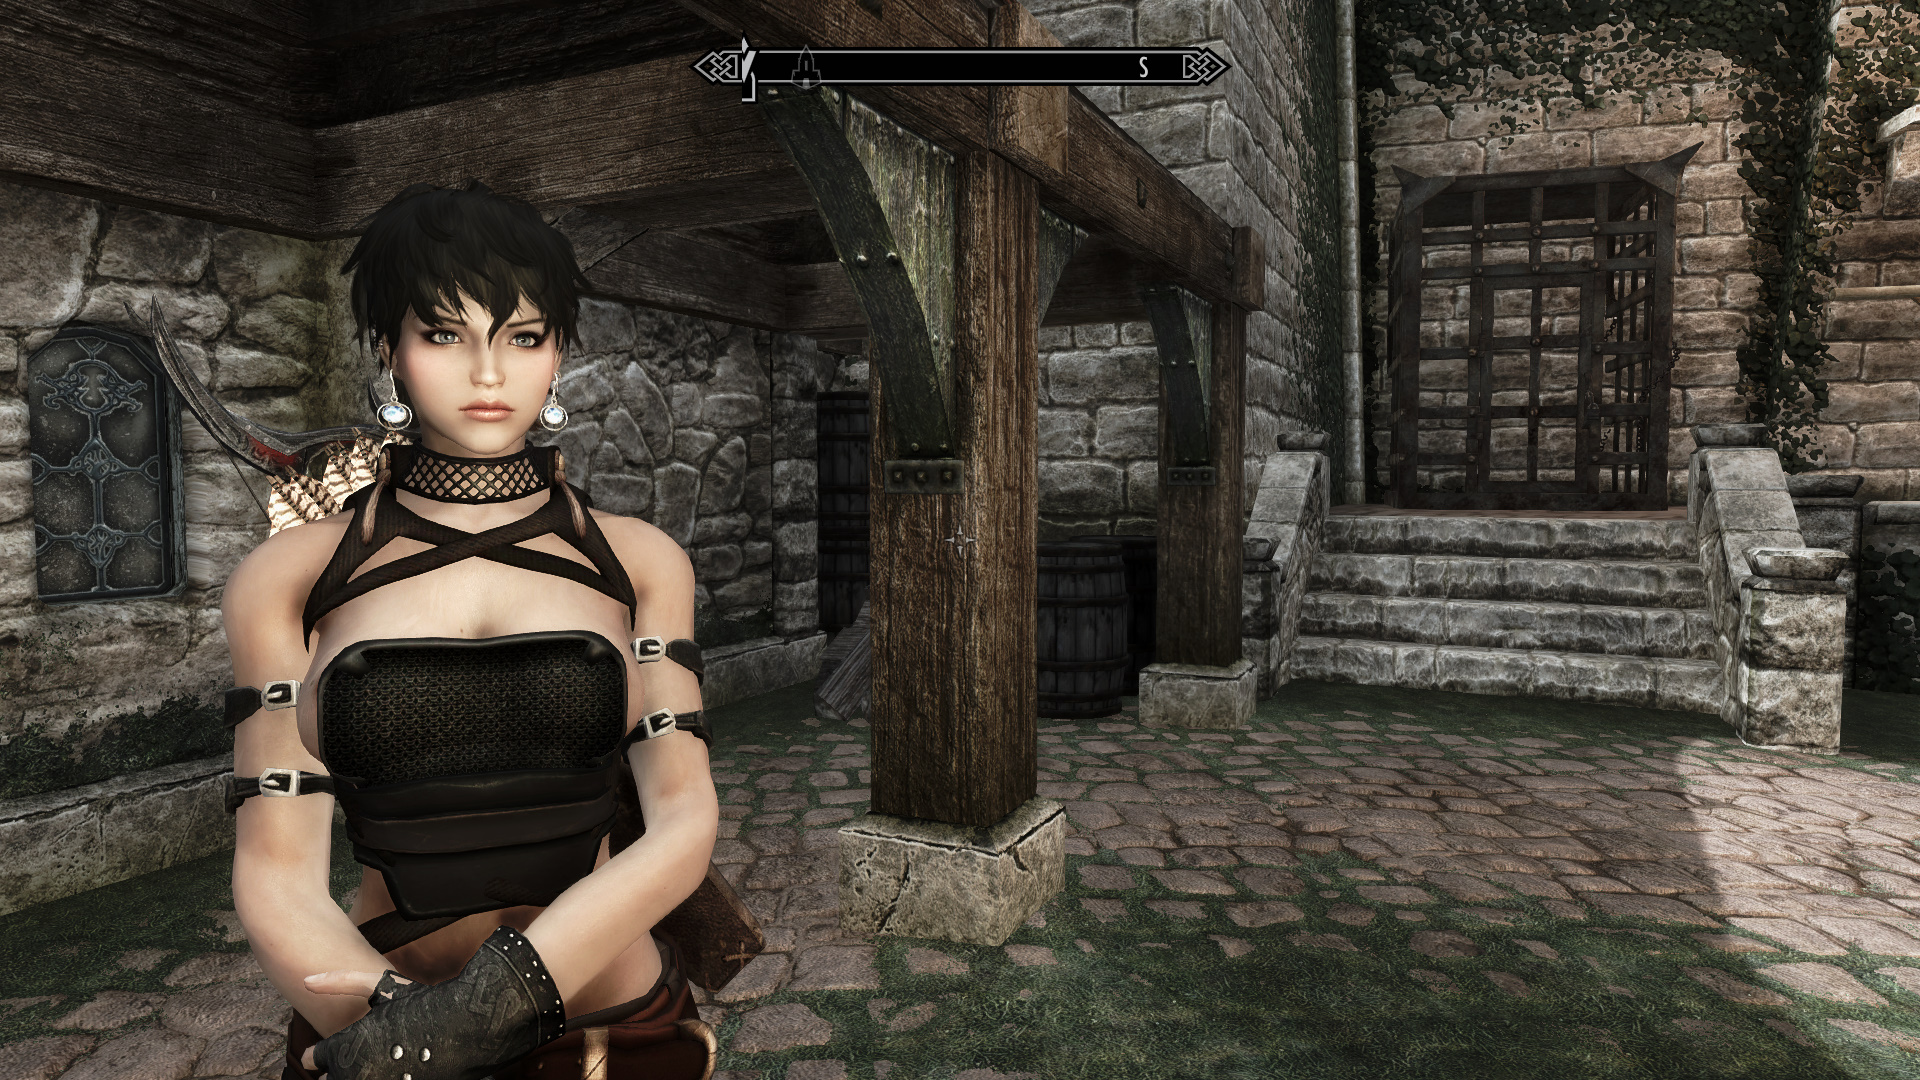 Beautiful Women And How To Make Them Page 74 Skyrim.